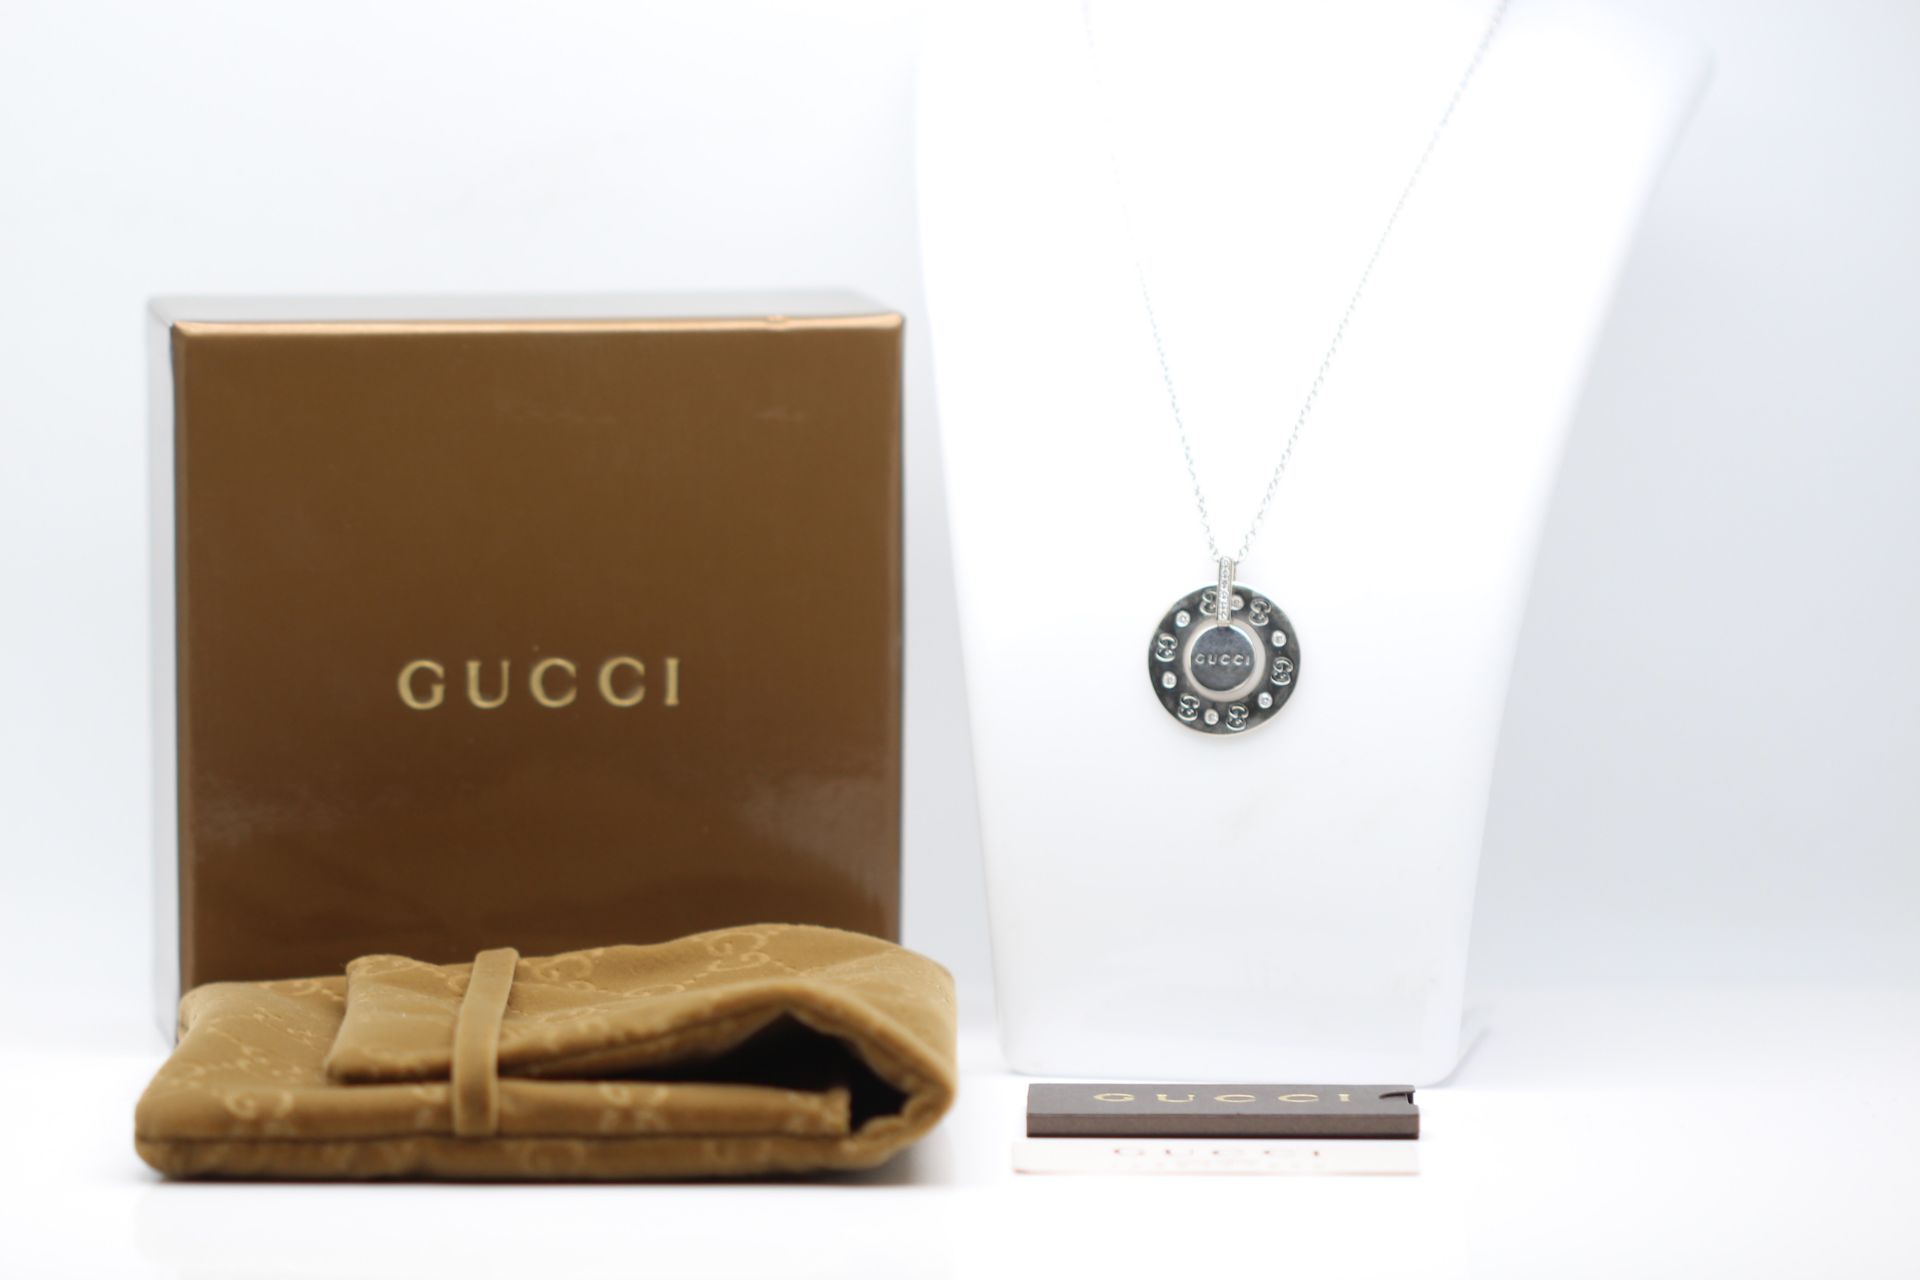 GUCCI 18K SOLID WHITE GOLD AND DIAMOND LADIES NECKLACE, COMPLETE WITH BOX AND PAPERS RRP £3950 (PV-J